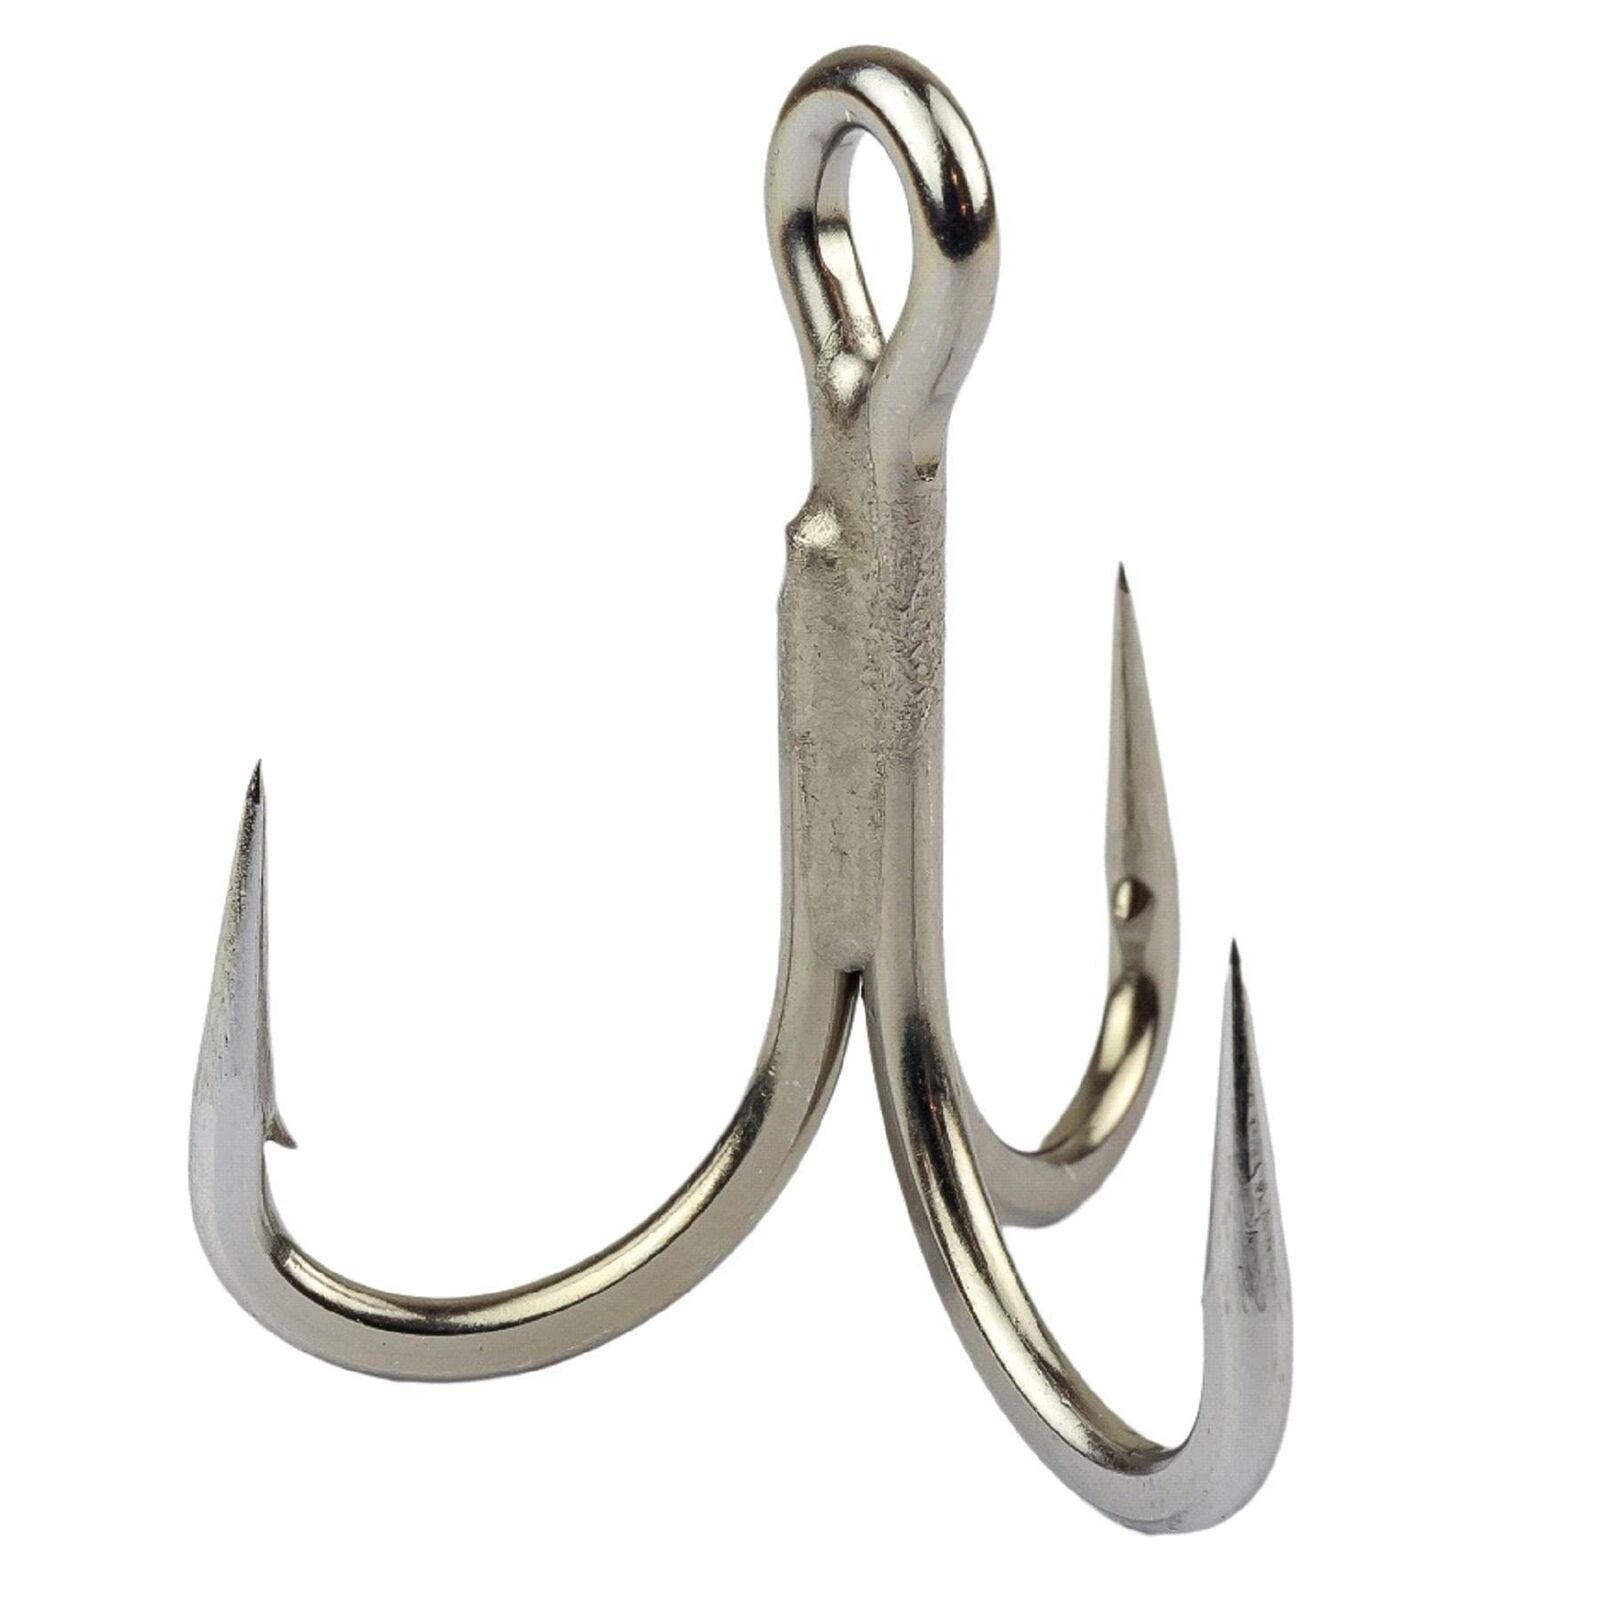 Mustad Classic Beak Hook, Size 1/0, Forged, 1X Strong